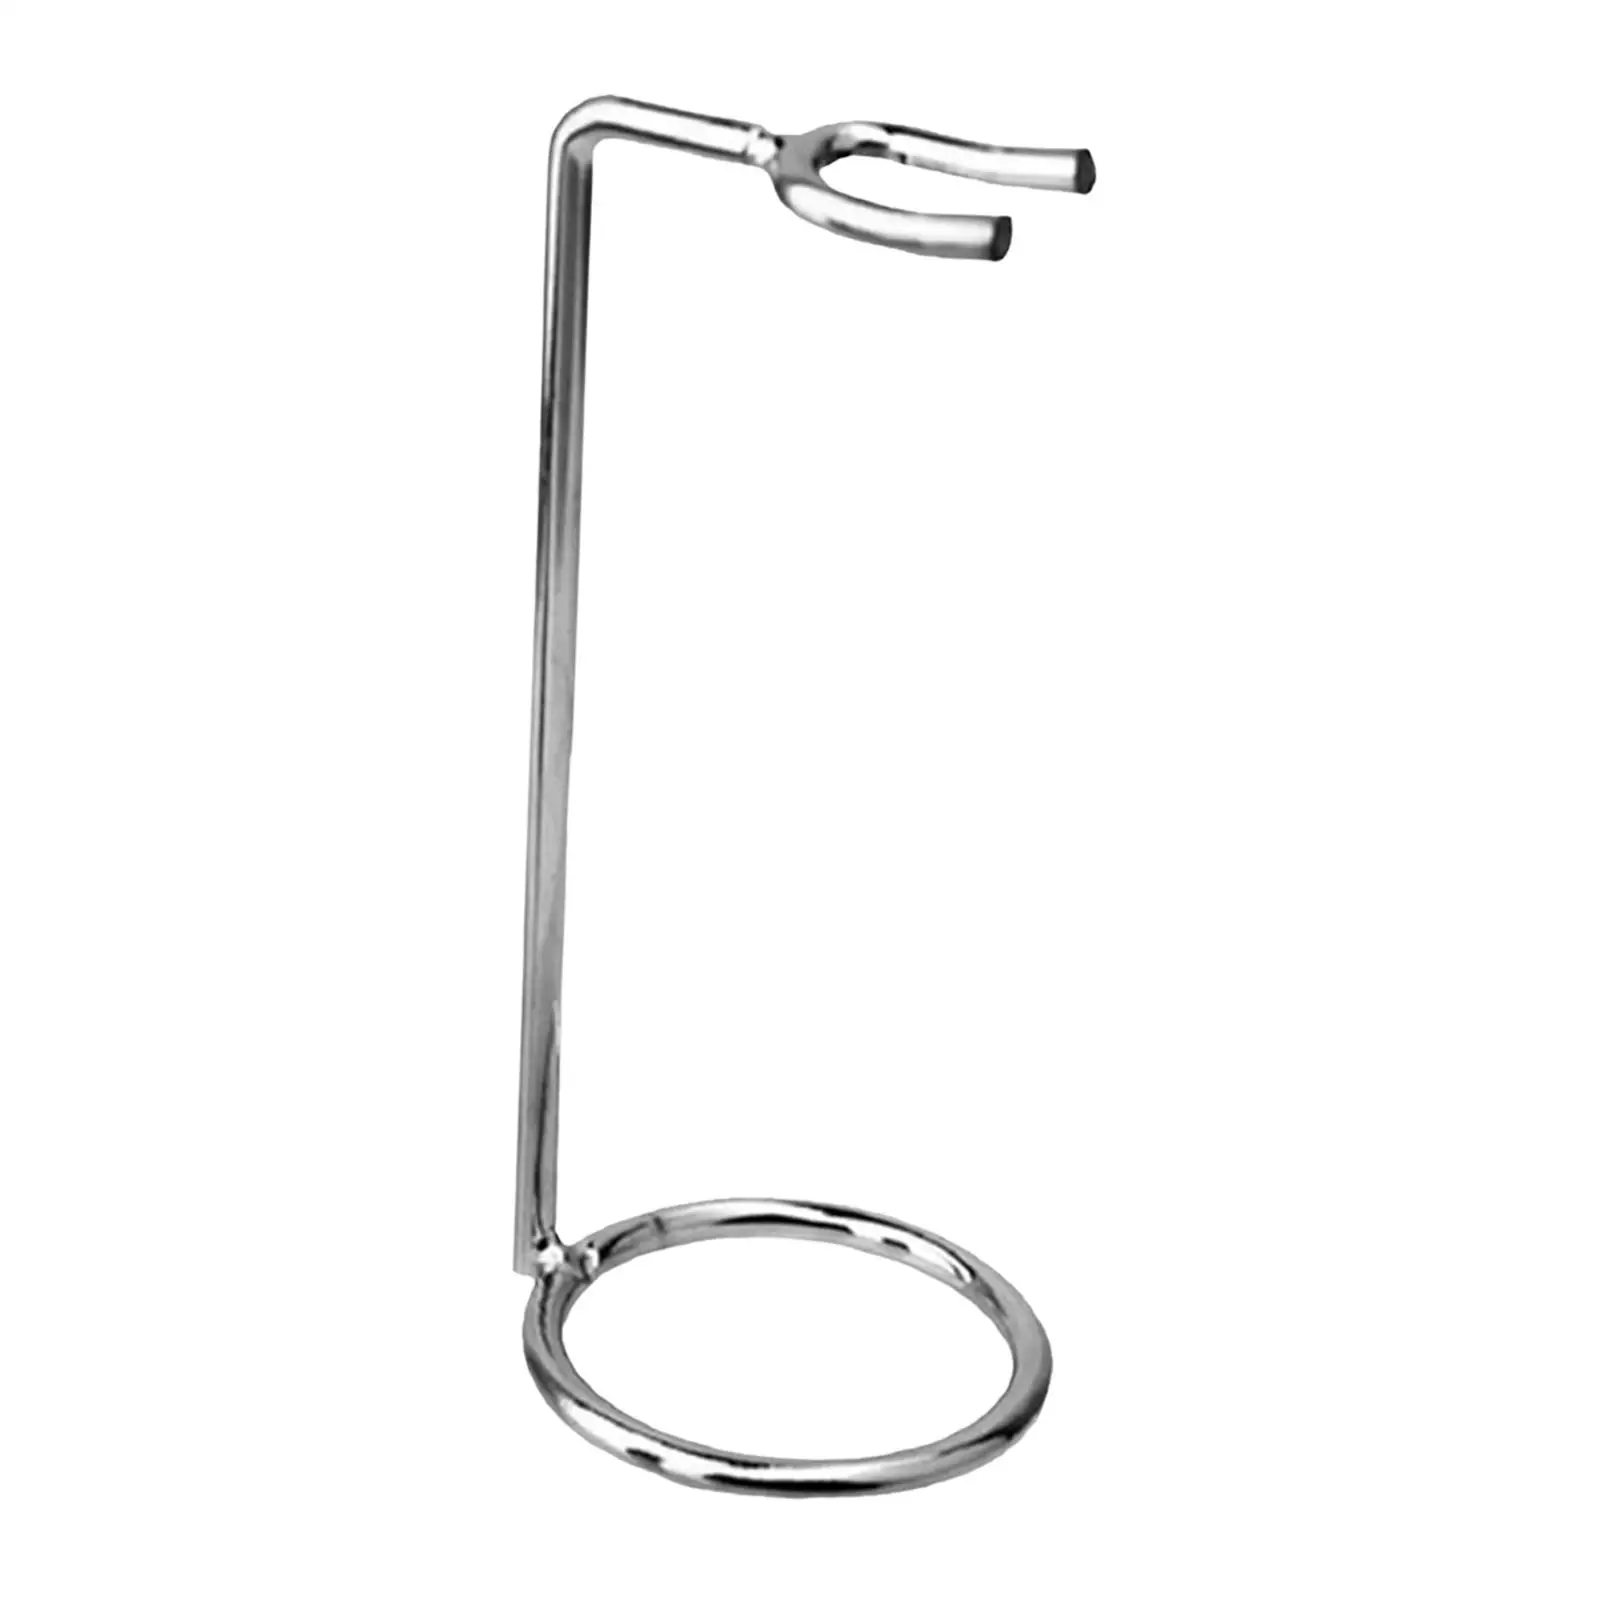 Razor Holder Stand Free Standing Shave Accessory for Bathroom Accessories